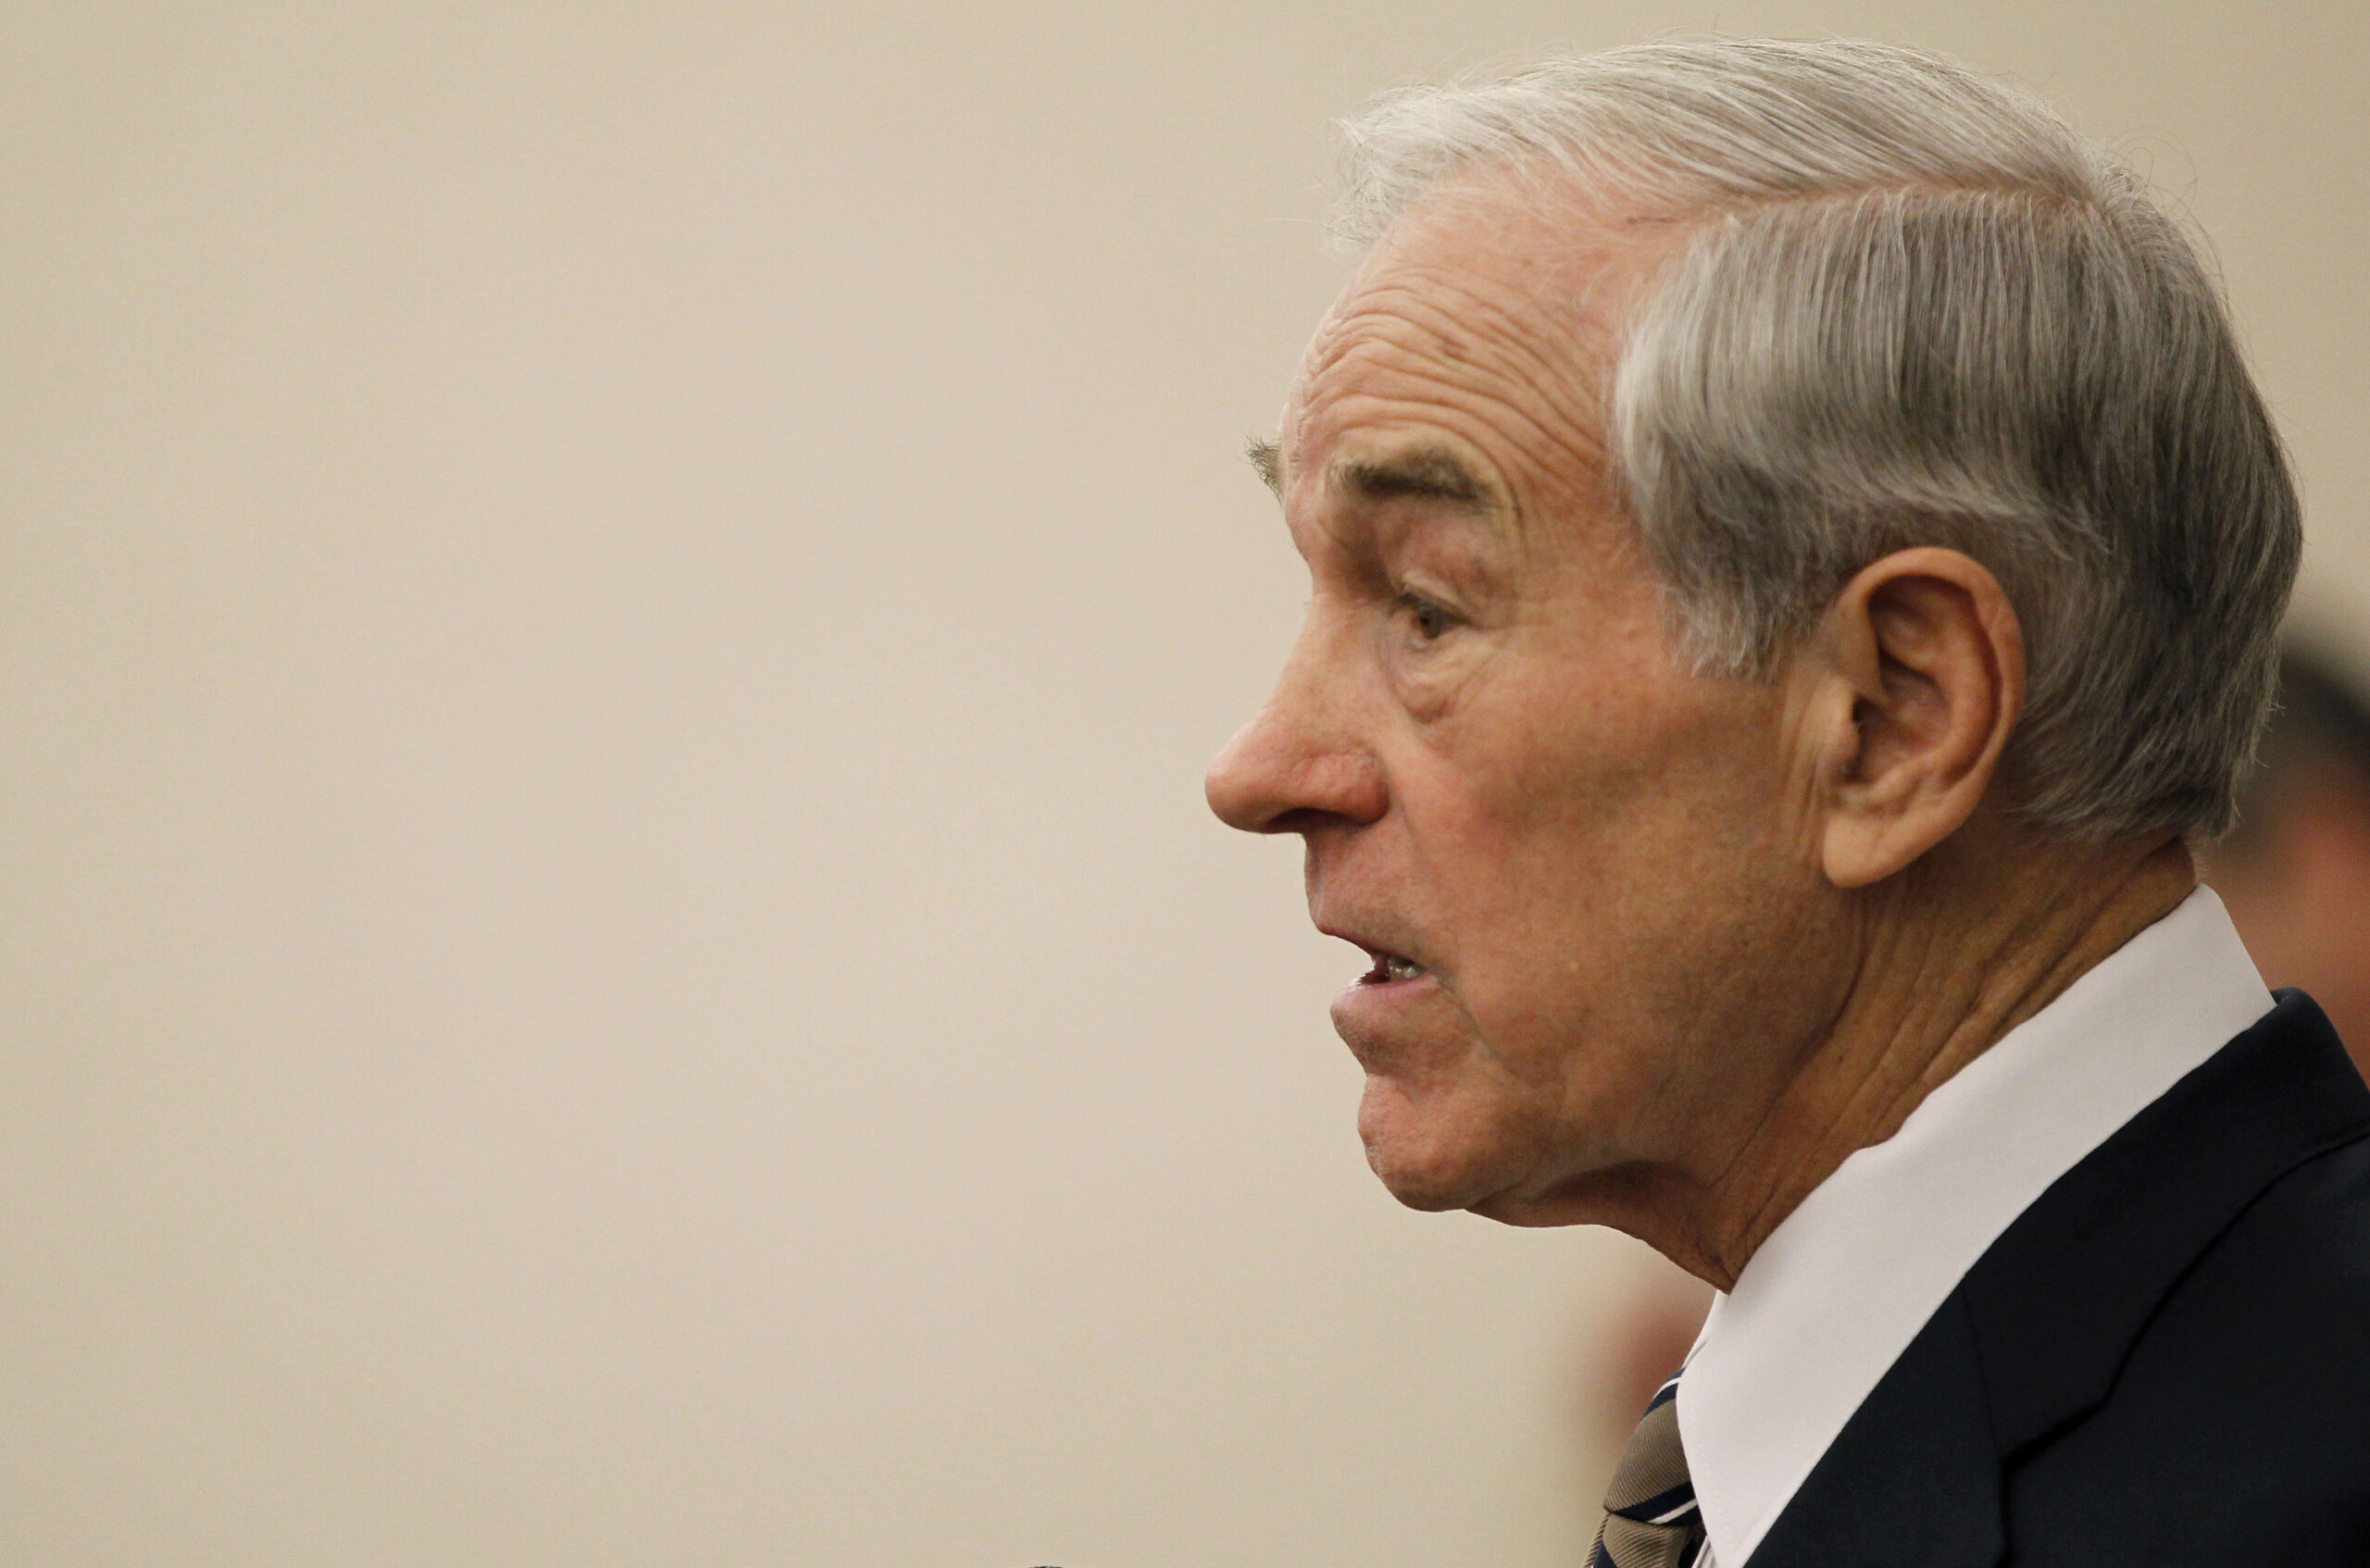 Ron Paul Says He's Been Locked Out of His Account, but Facebook Says It Was  a Mistake